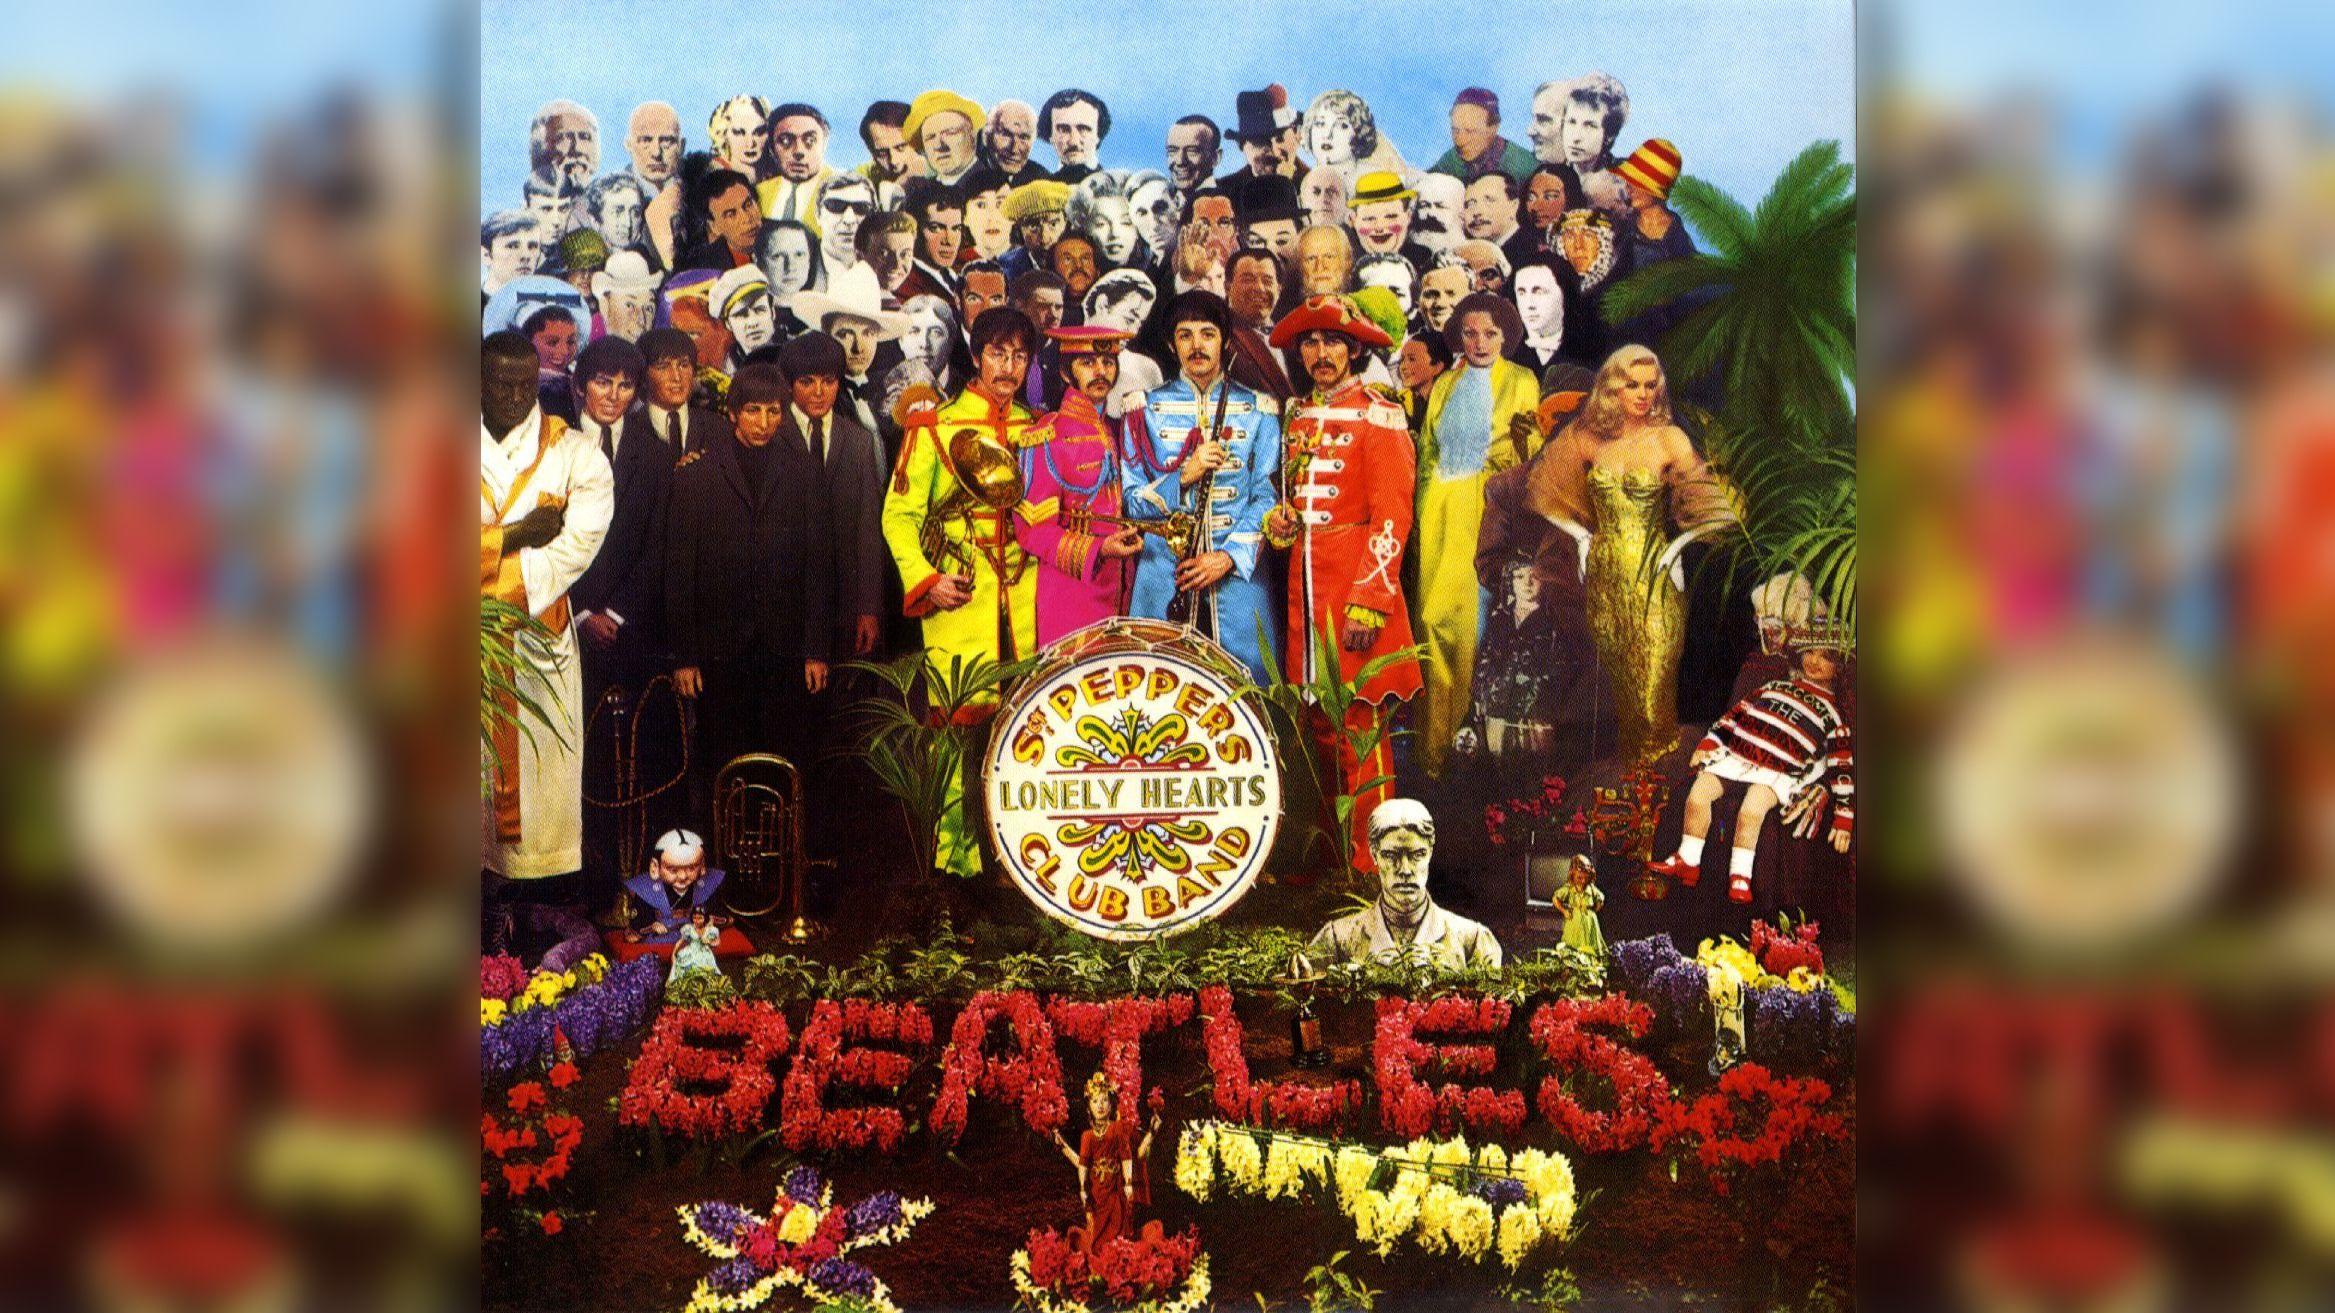 The Beatles Sgt. Pepper Logo - Beatles' 'Sgt. Pepper' Artwork: 10 Things You Didn't Know – Rolling ...